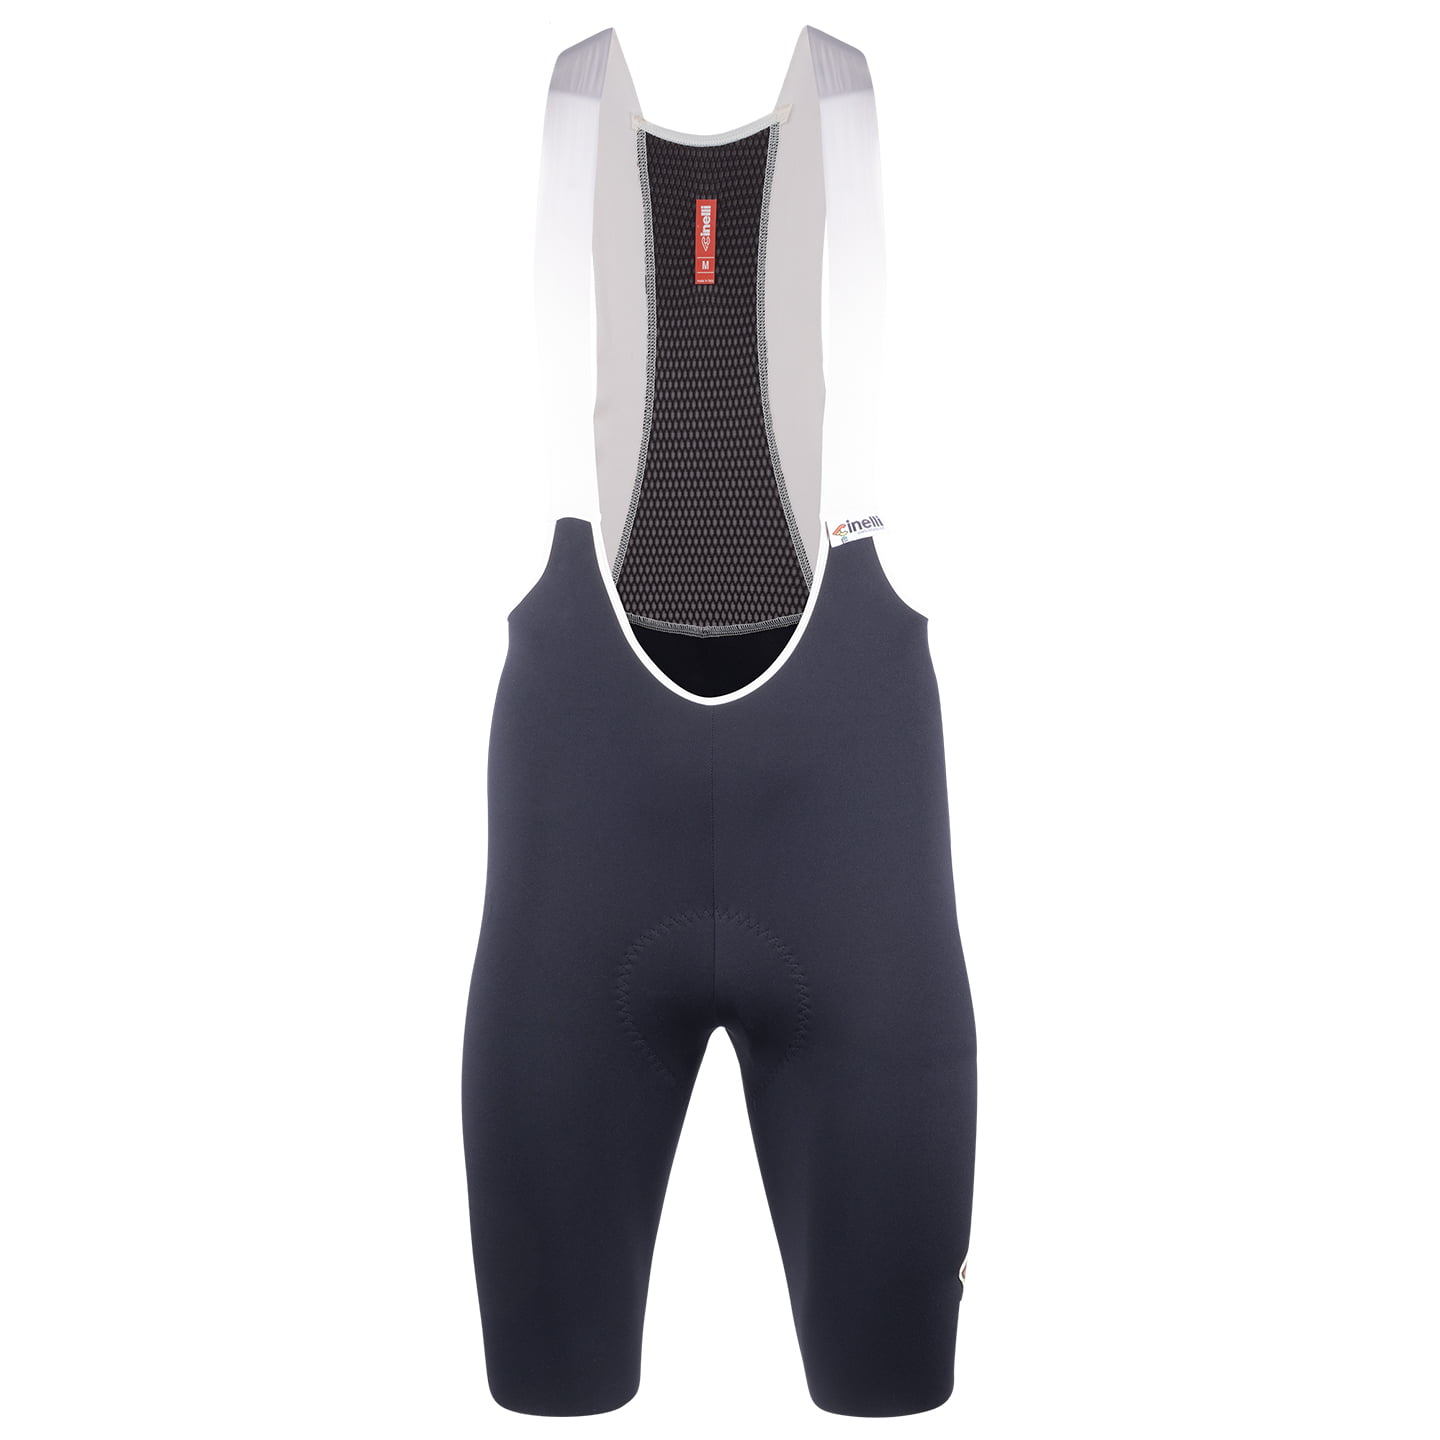 CINELLI Tempo Bib Shorts, for men, size 2XL, Cycle shorts, Cycling clothing